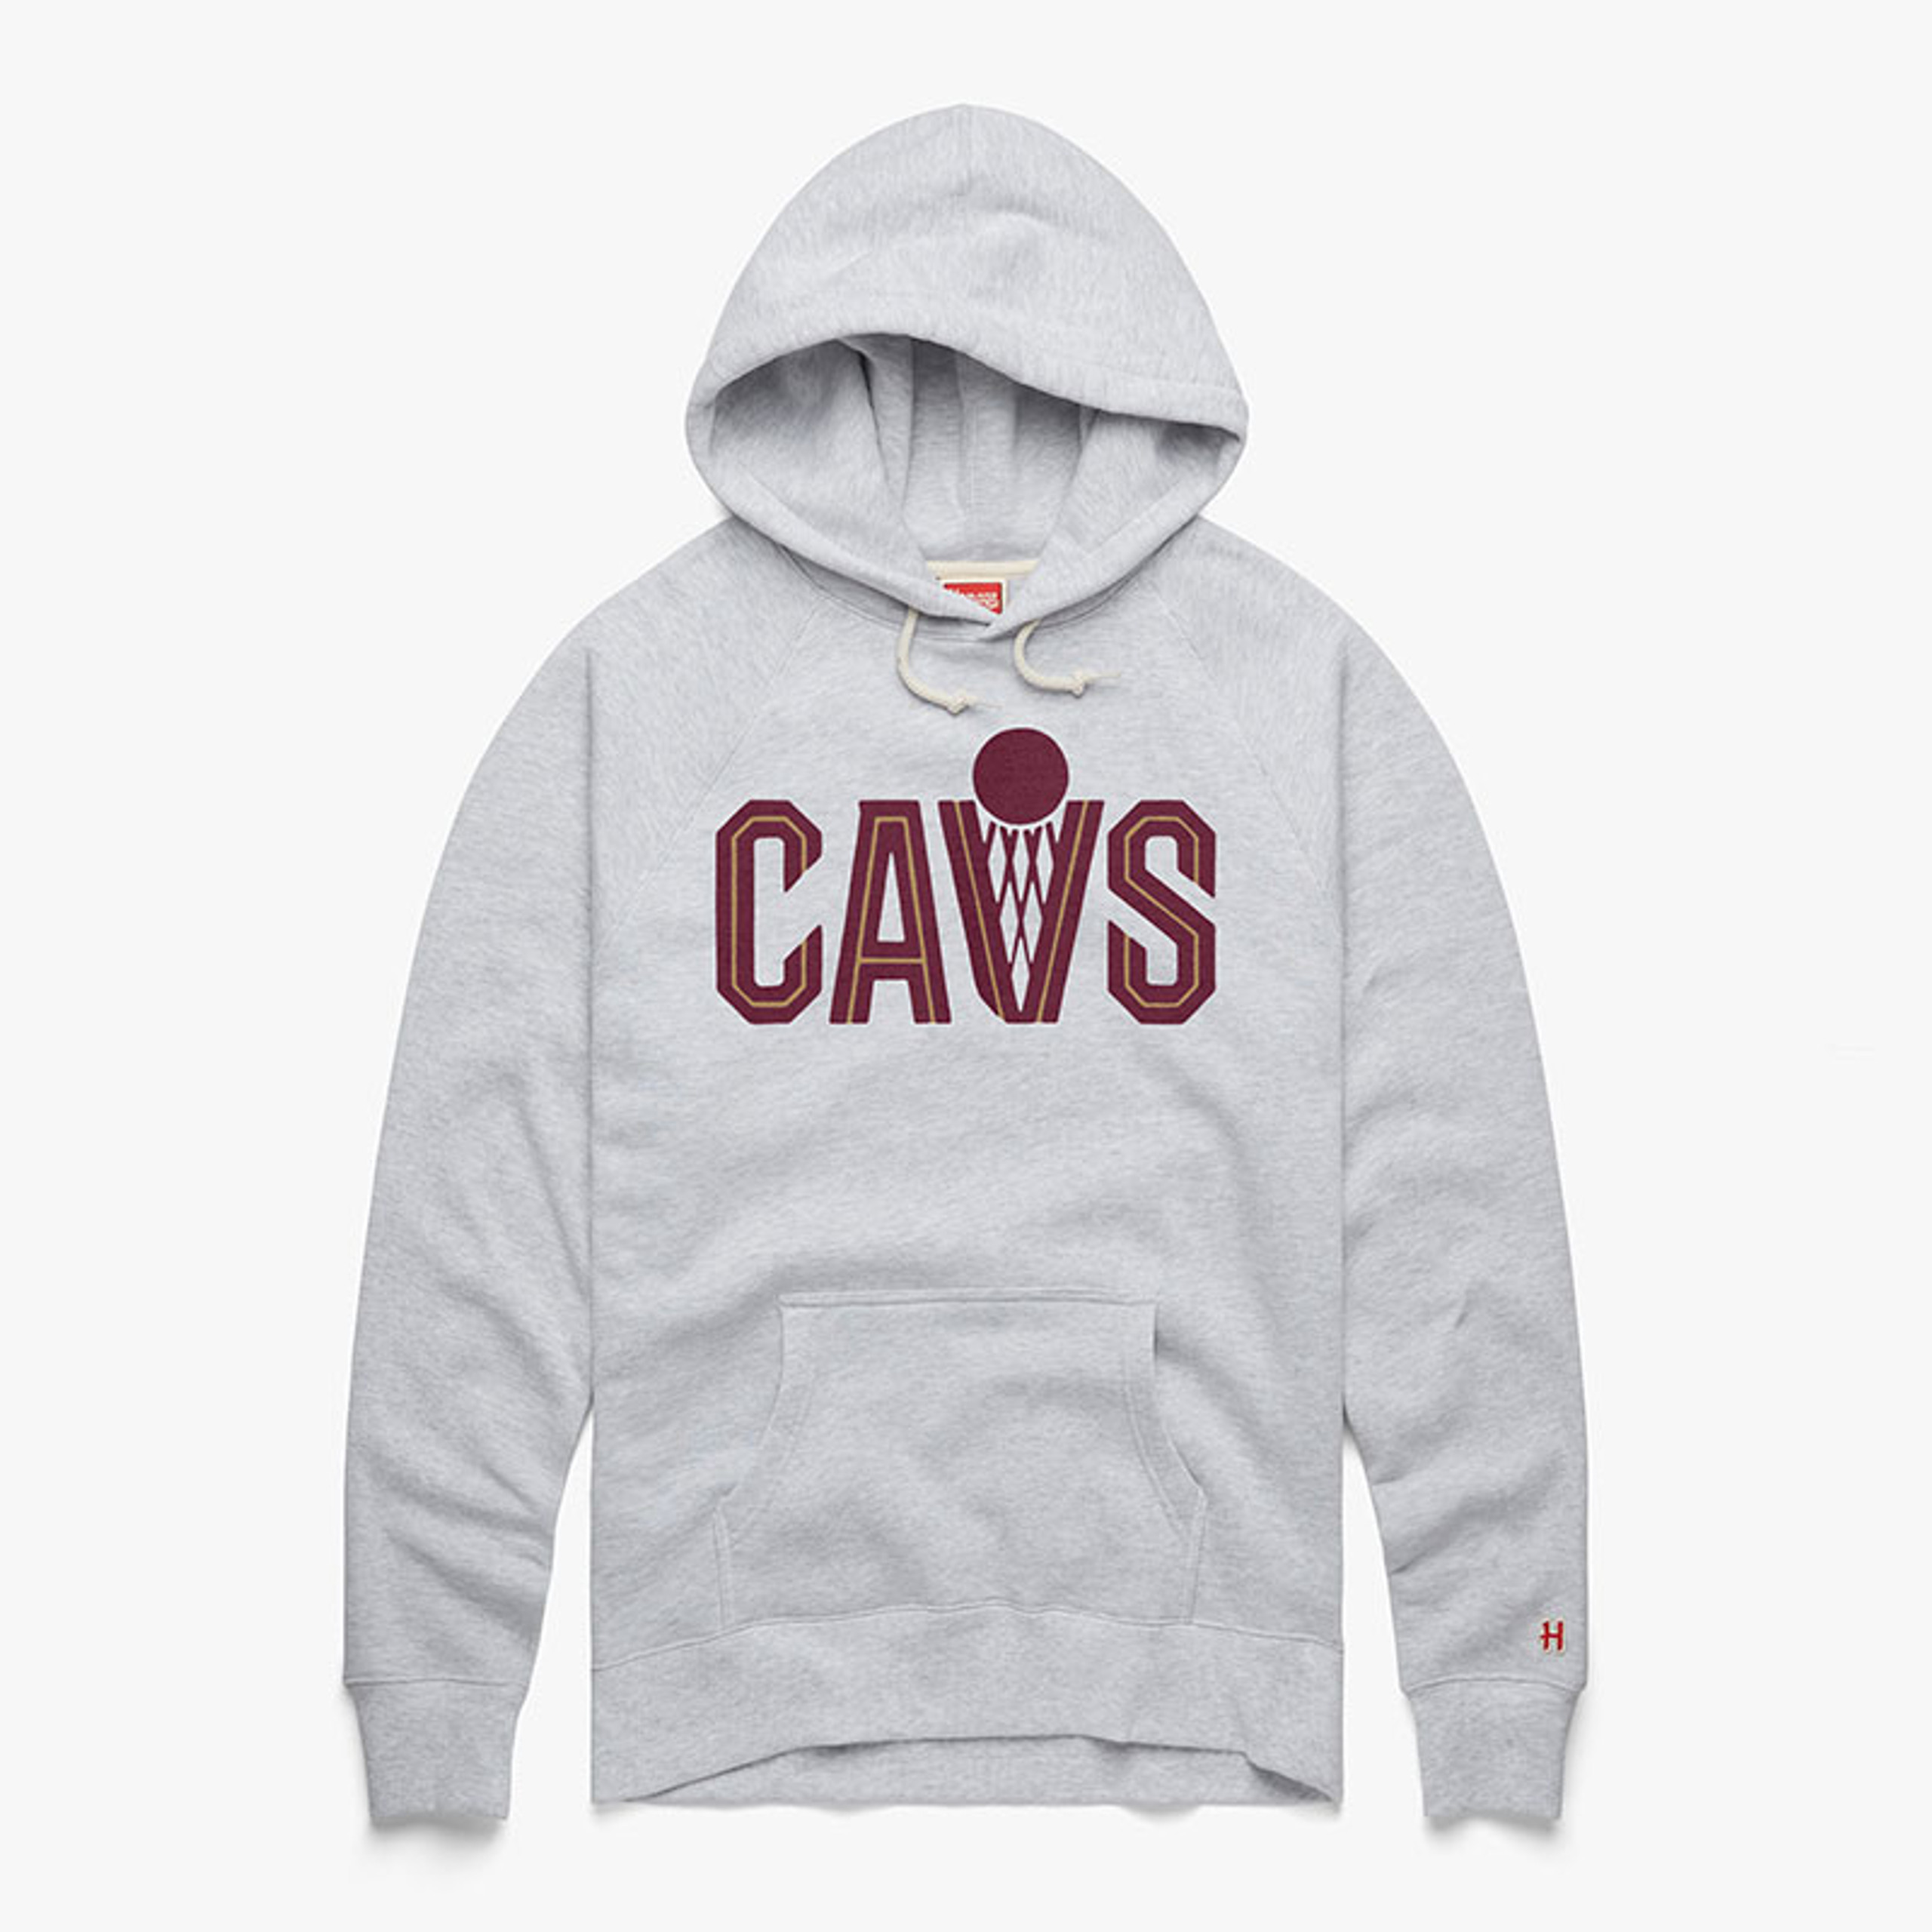 Homage Wine and Gold New CAVS Hoodie | Cavs Team Shop